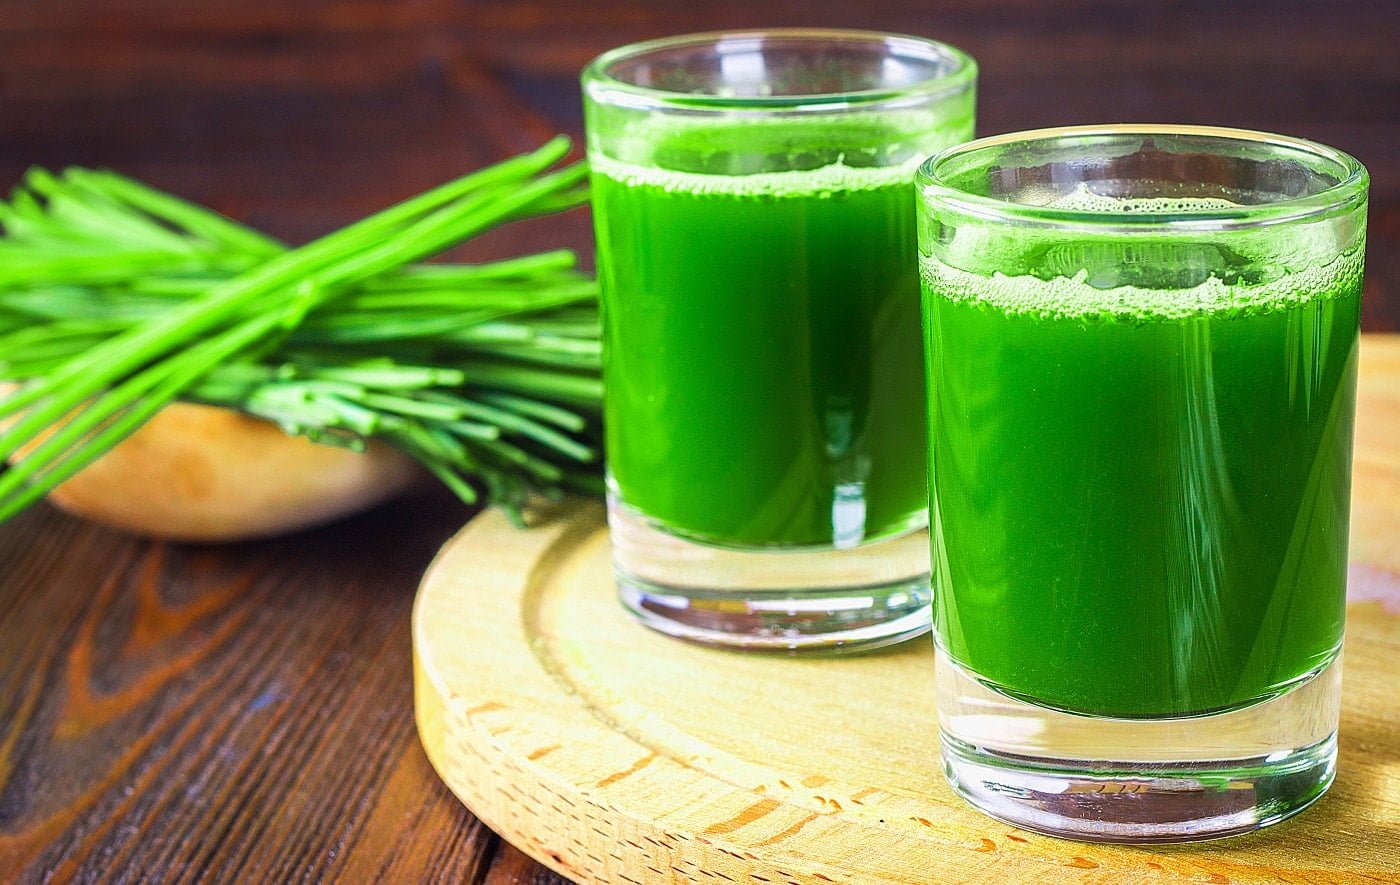 Wheatgrass shot. Juice from wheat grass. Trend of health